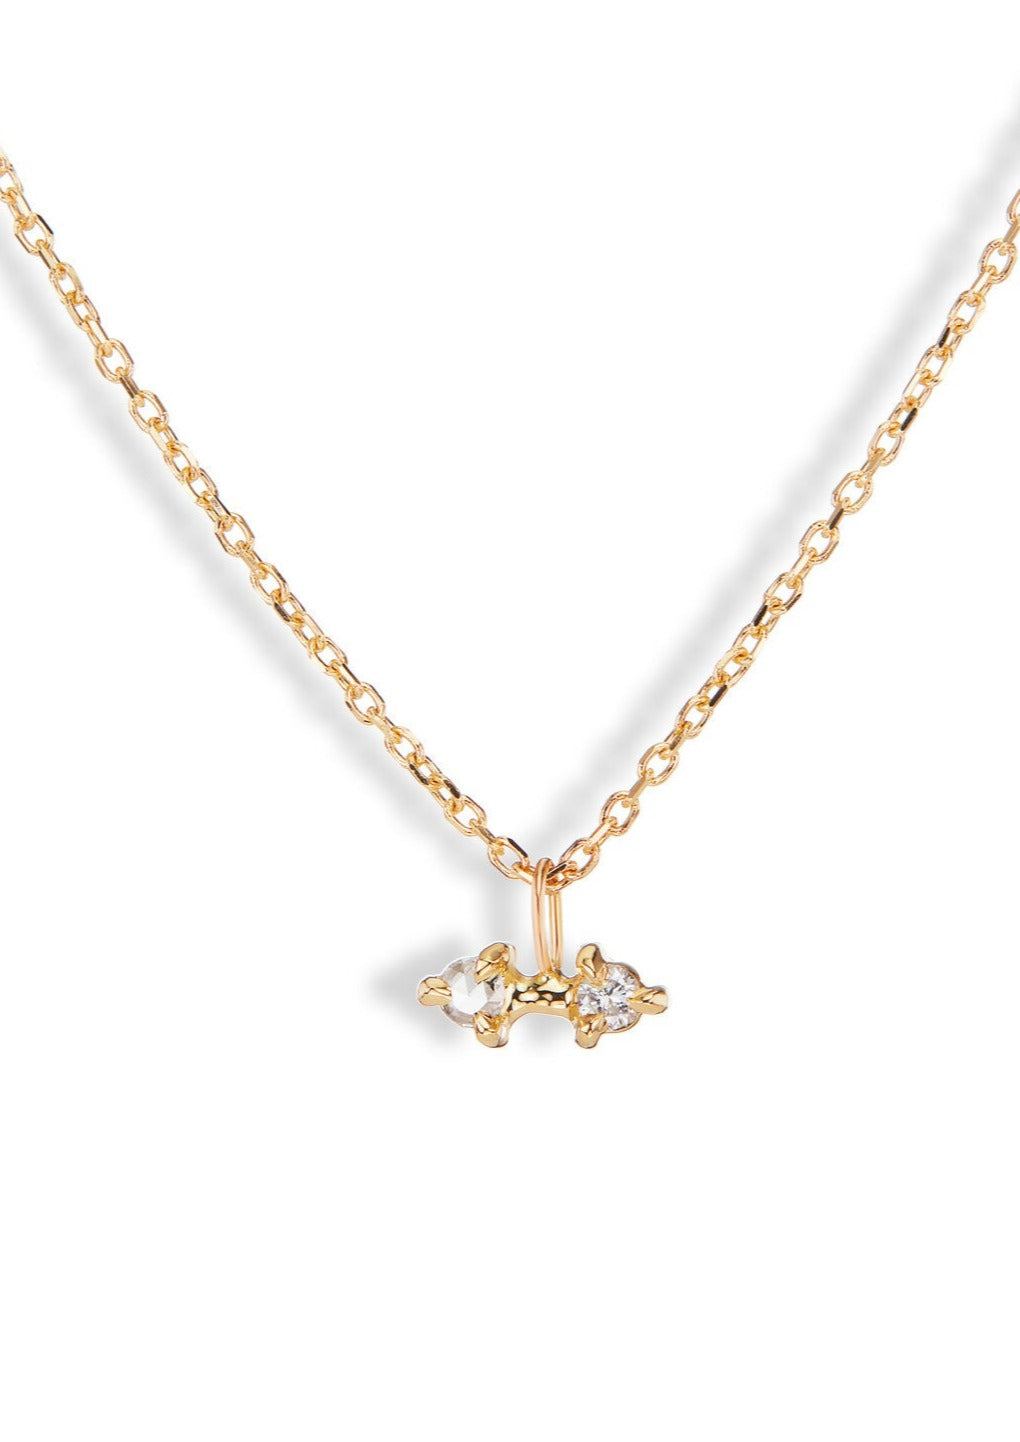 Sloane Necklace // Gold and Diamond